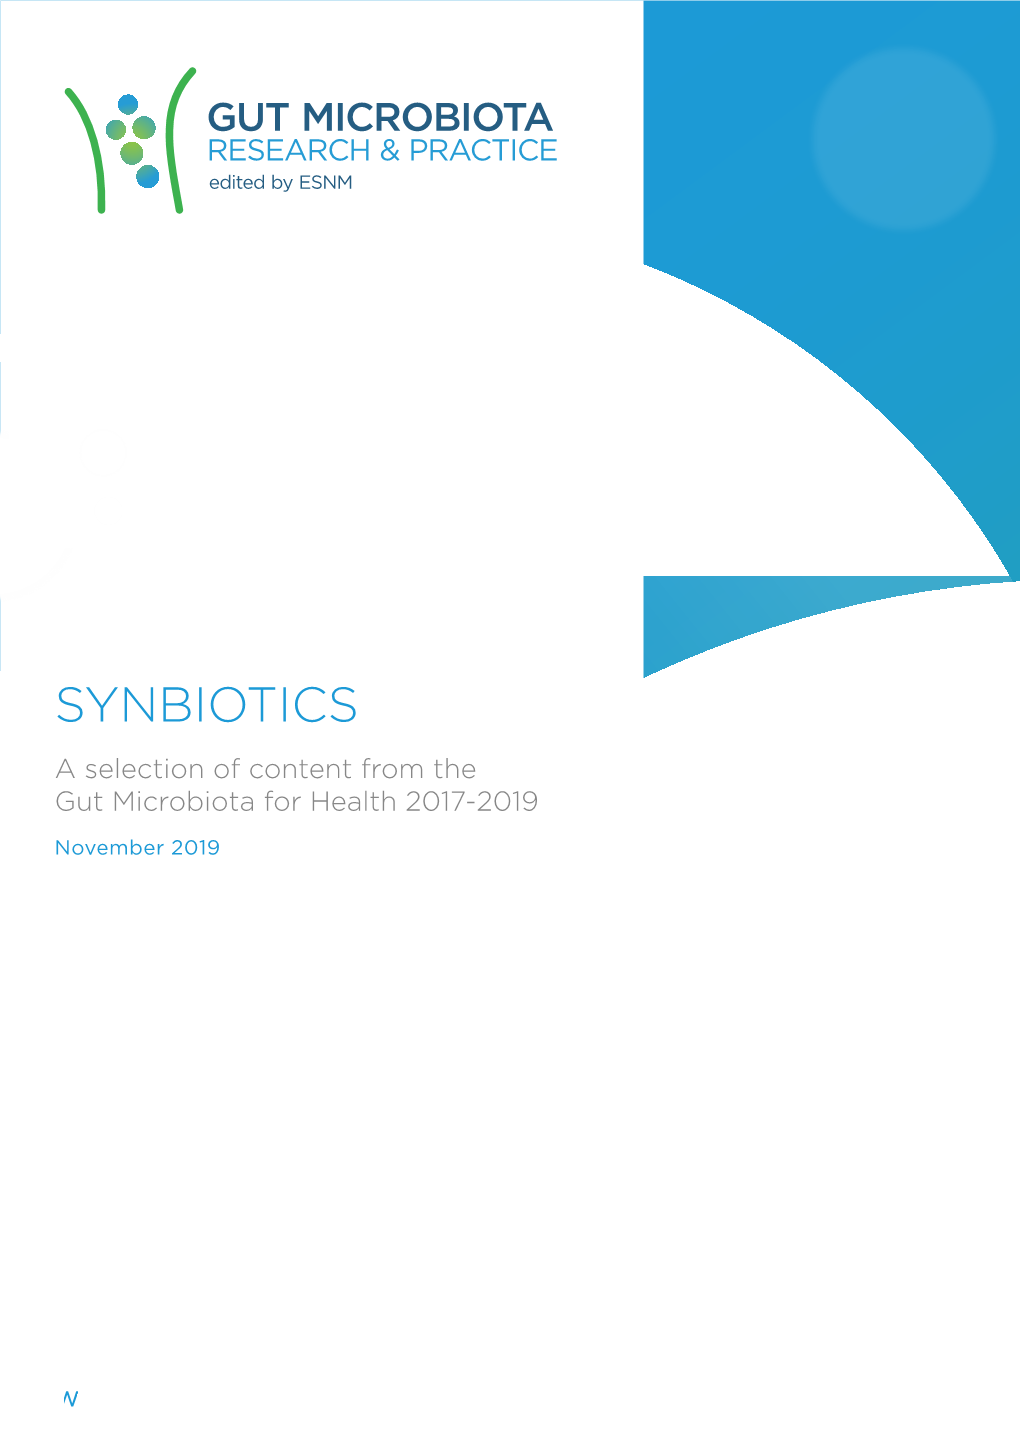 SYNBIOTICS a Selection of Content from the Gut Microbiota for Health 2017-2019